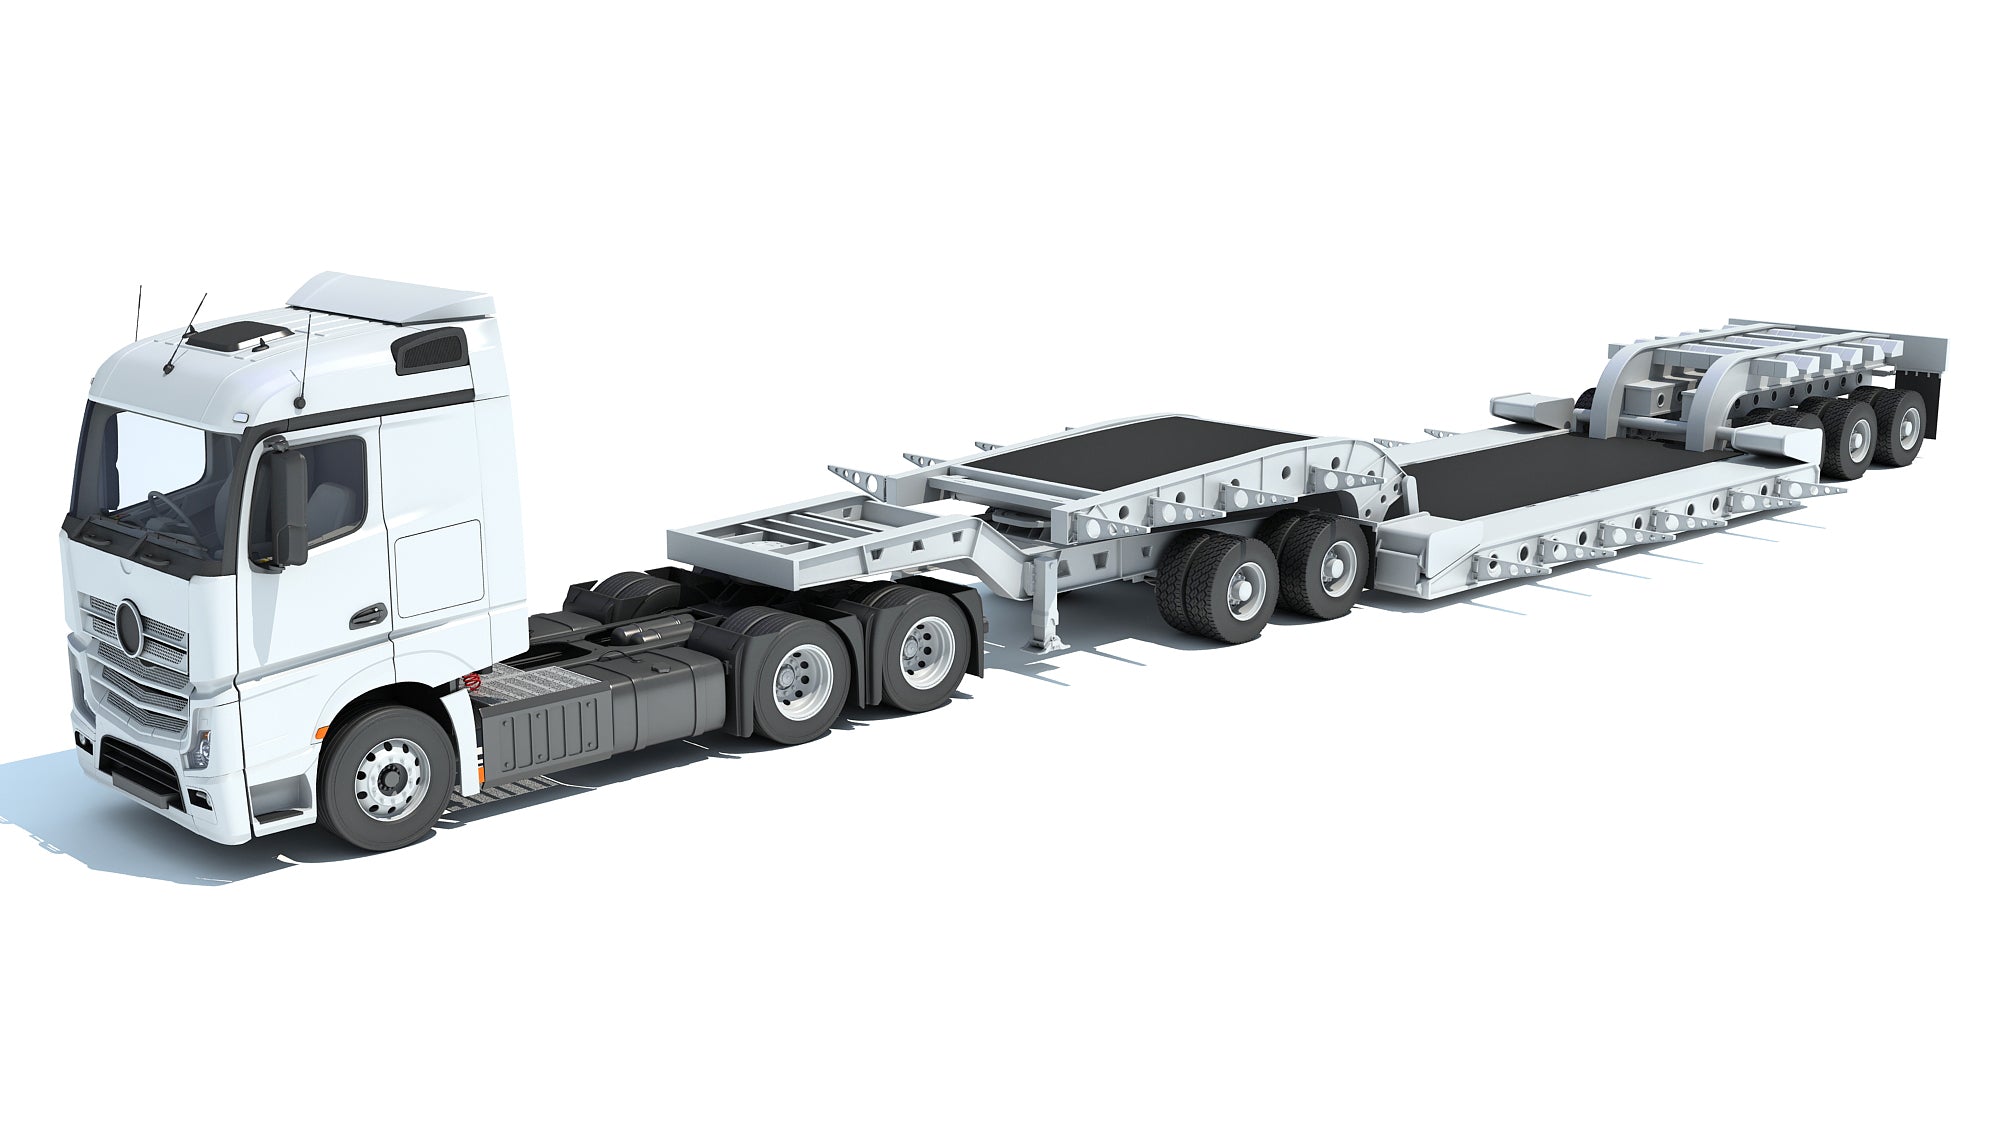 Truck with Lowboy Trailer